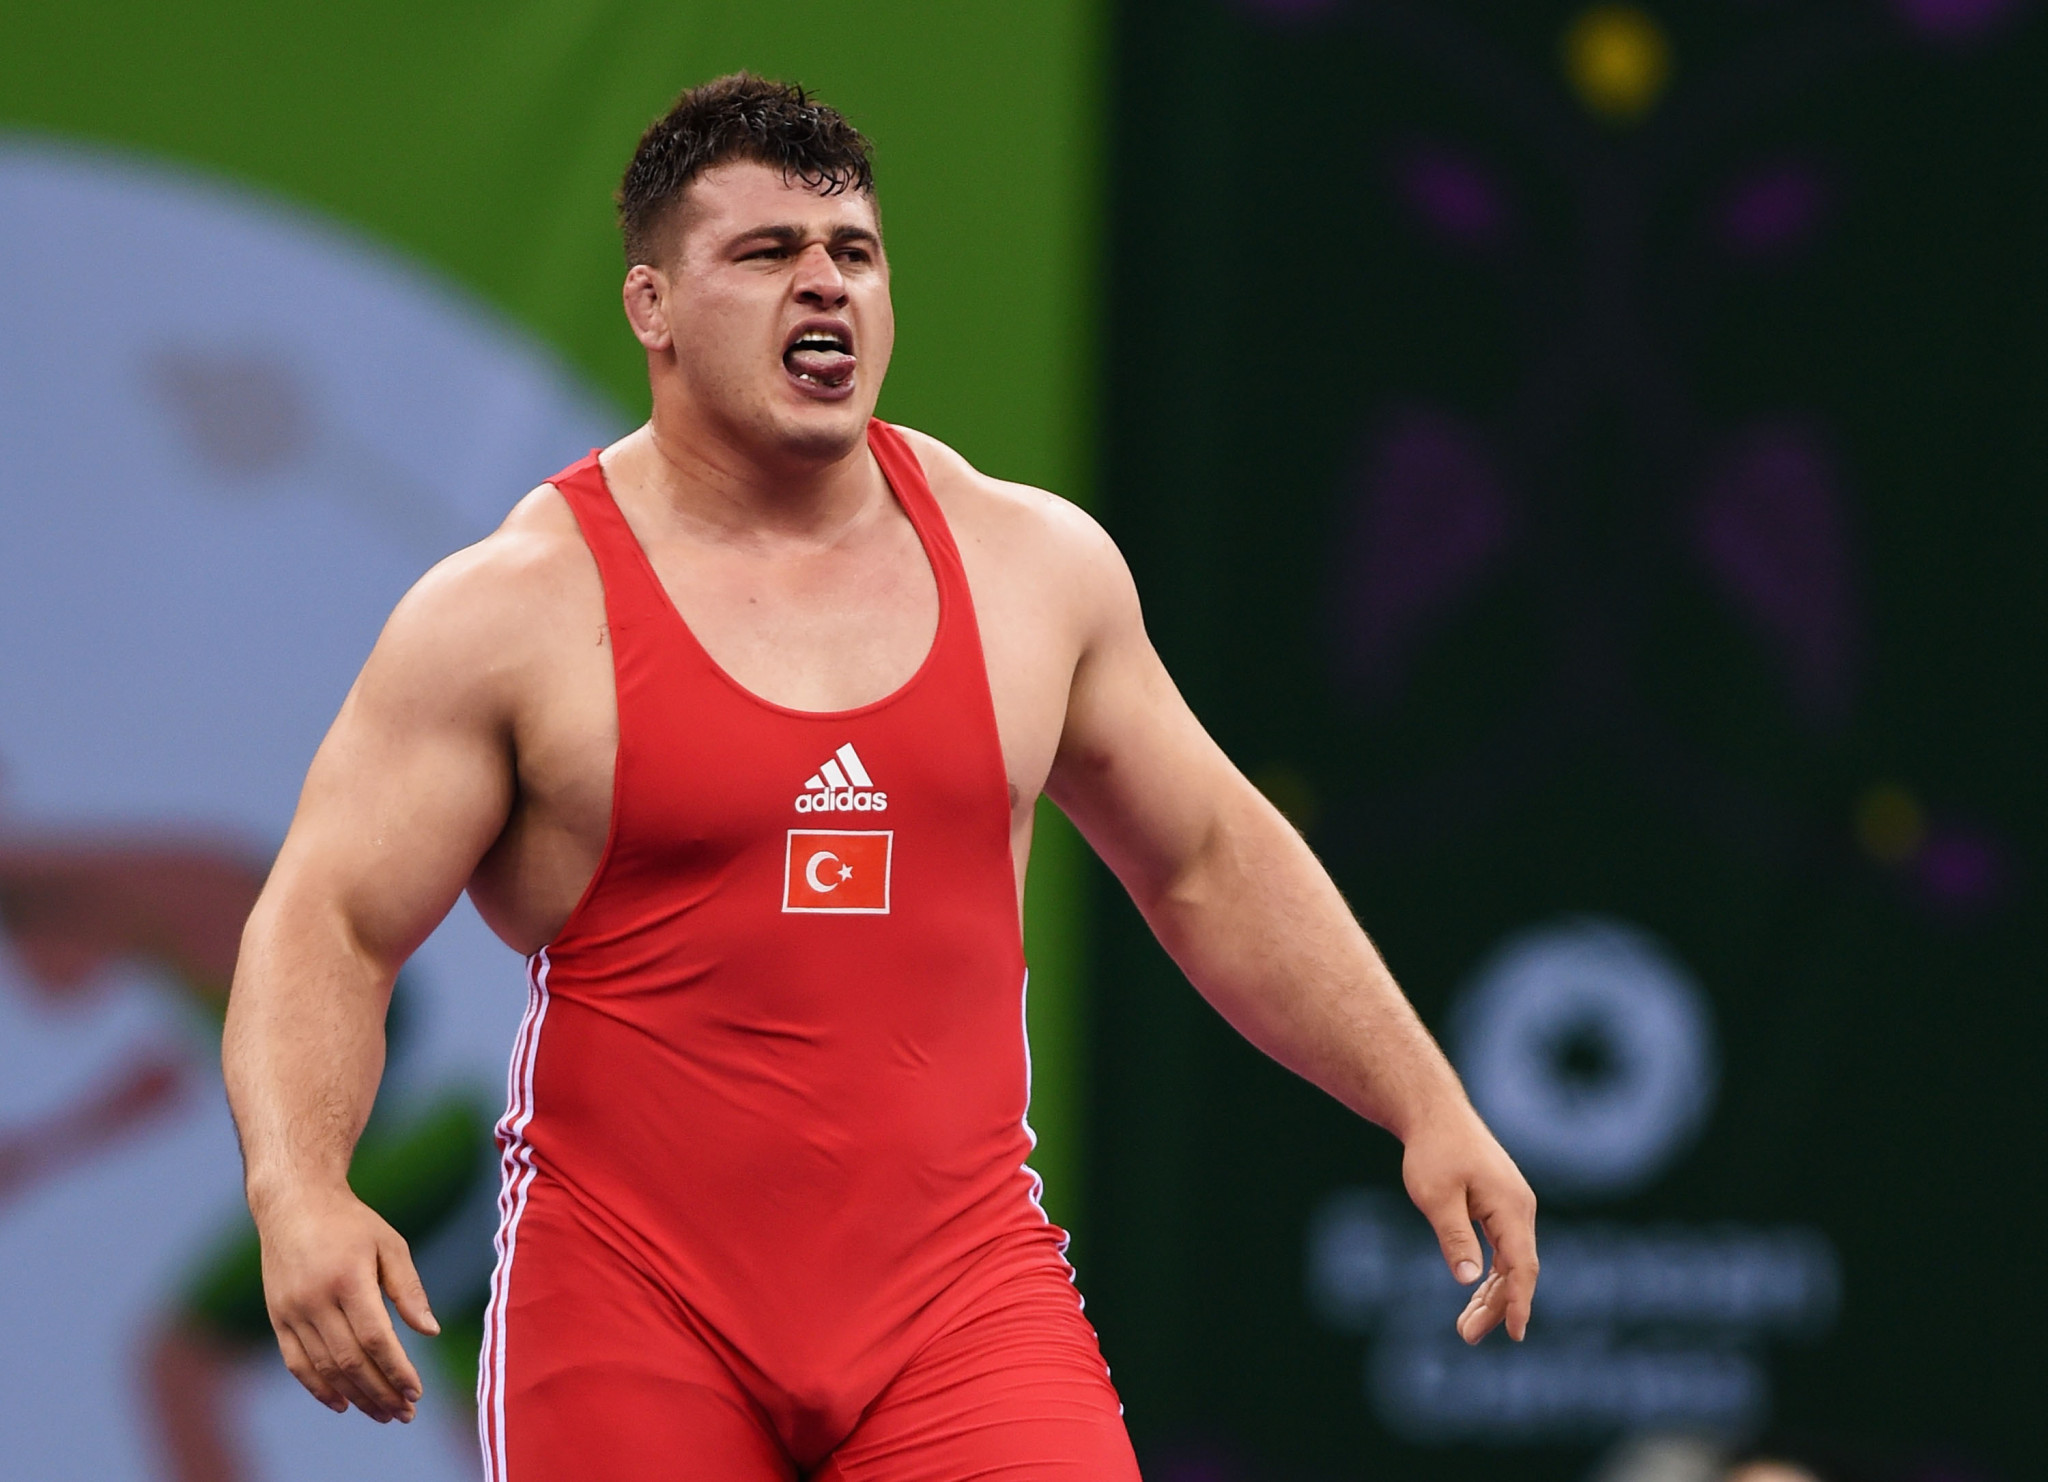 Riza Kayaalp won his tenth European Championship title in the men's 130kg category at the European Wrestling Championships ©Getty Images